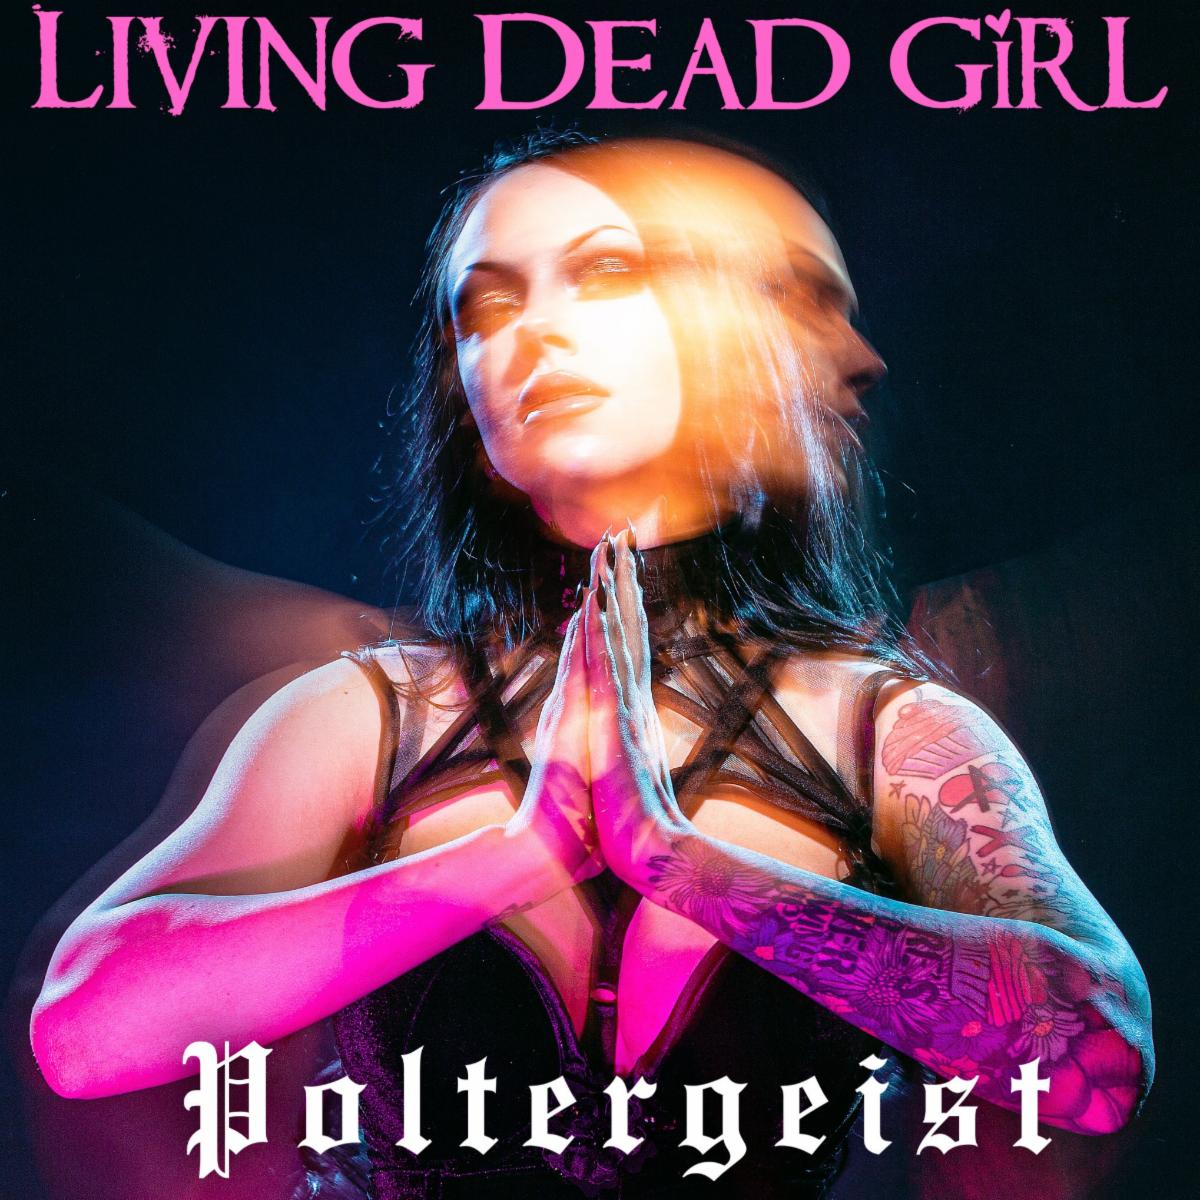 LIVING DEAD GIRL Delivers Haunting New Single, “Poltergeist”